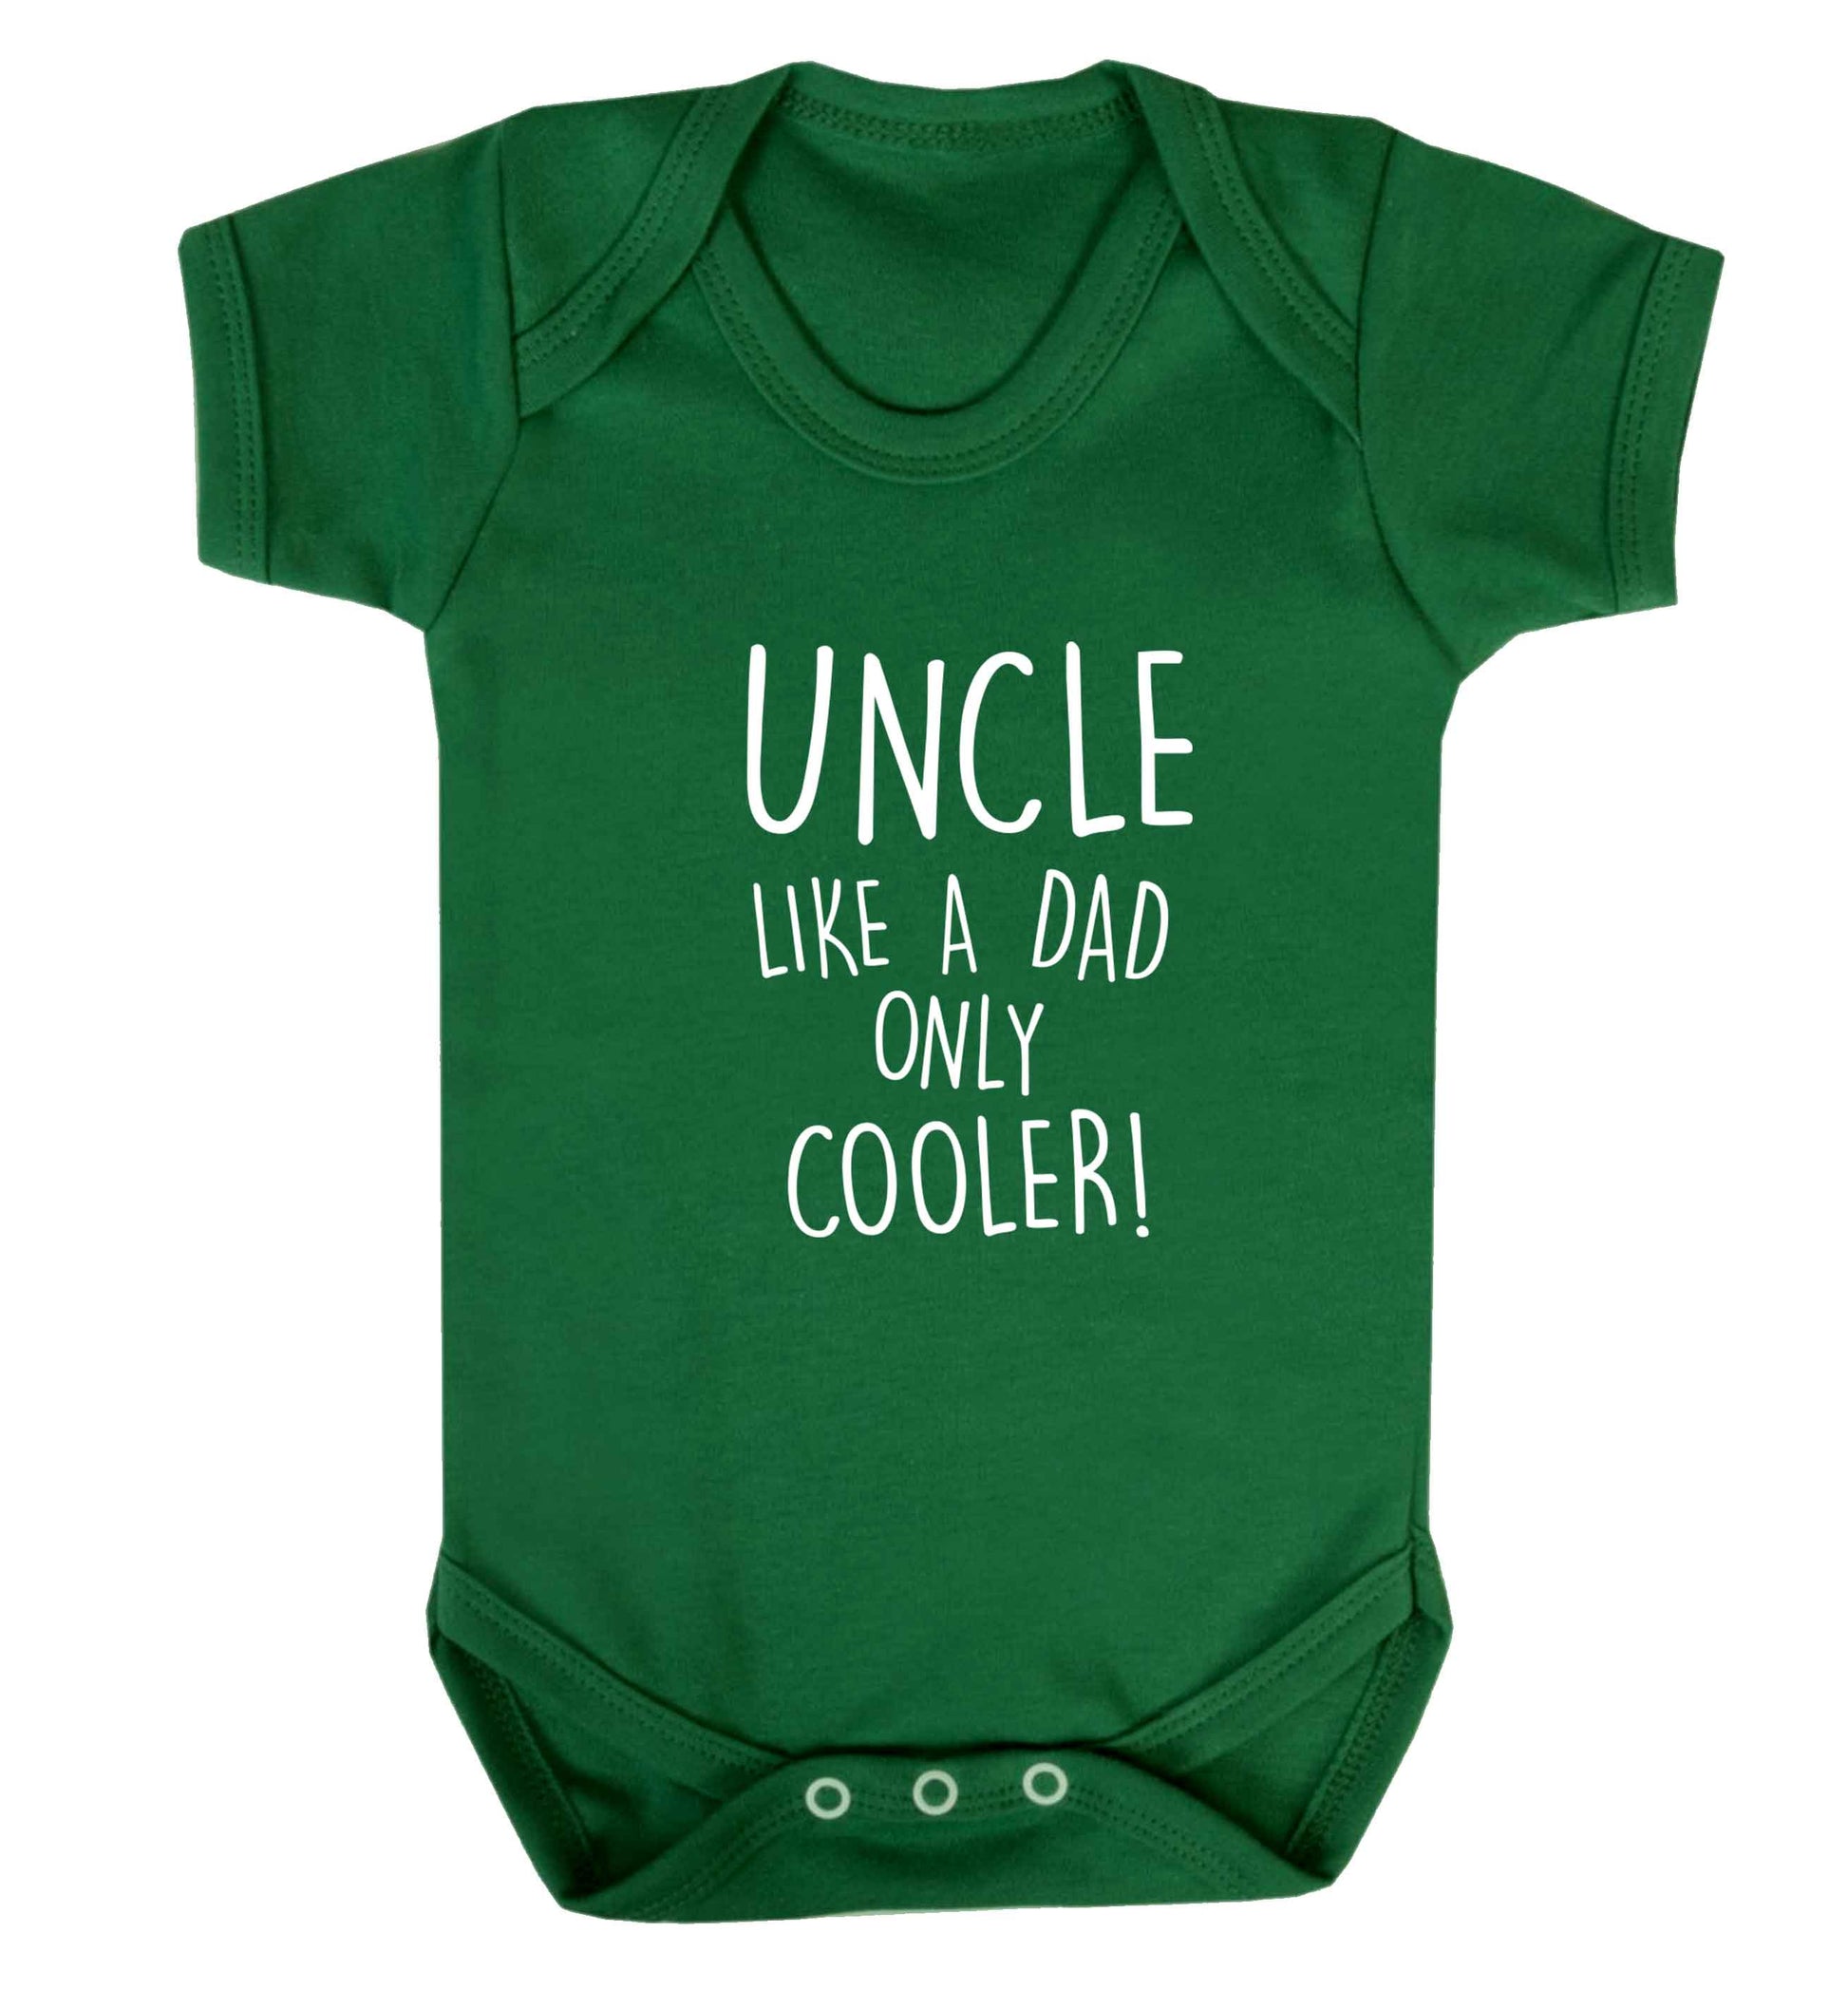 Uncle like a dad only cooler baby vest green 18-24 months